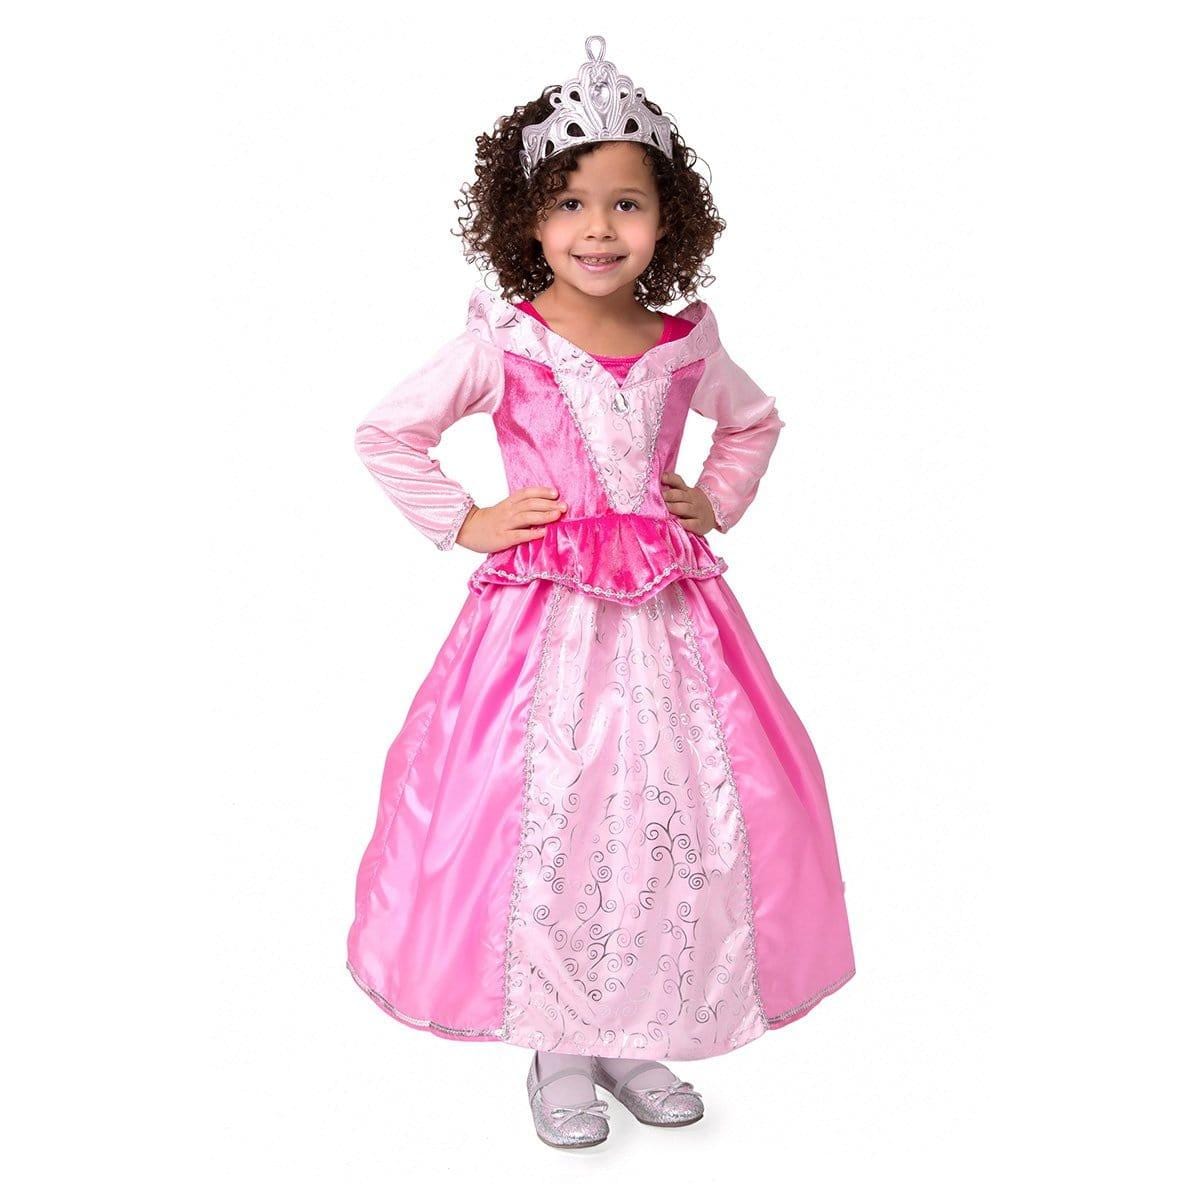 Buy Costumes Aurora Costume for Kids, Sleeping Beauty sold at Party Expert